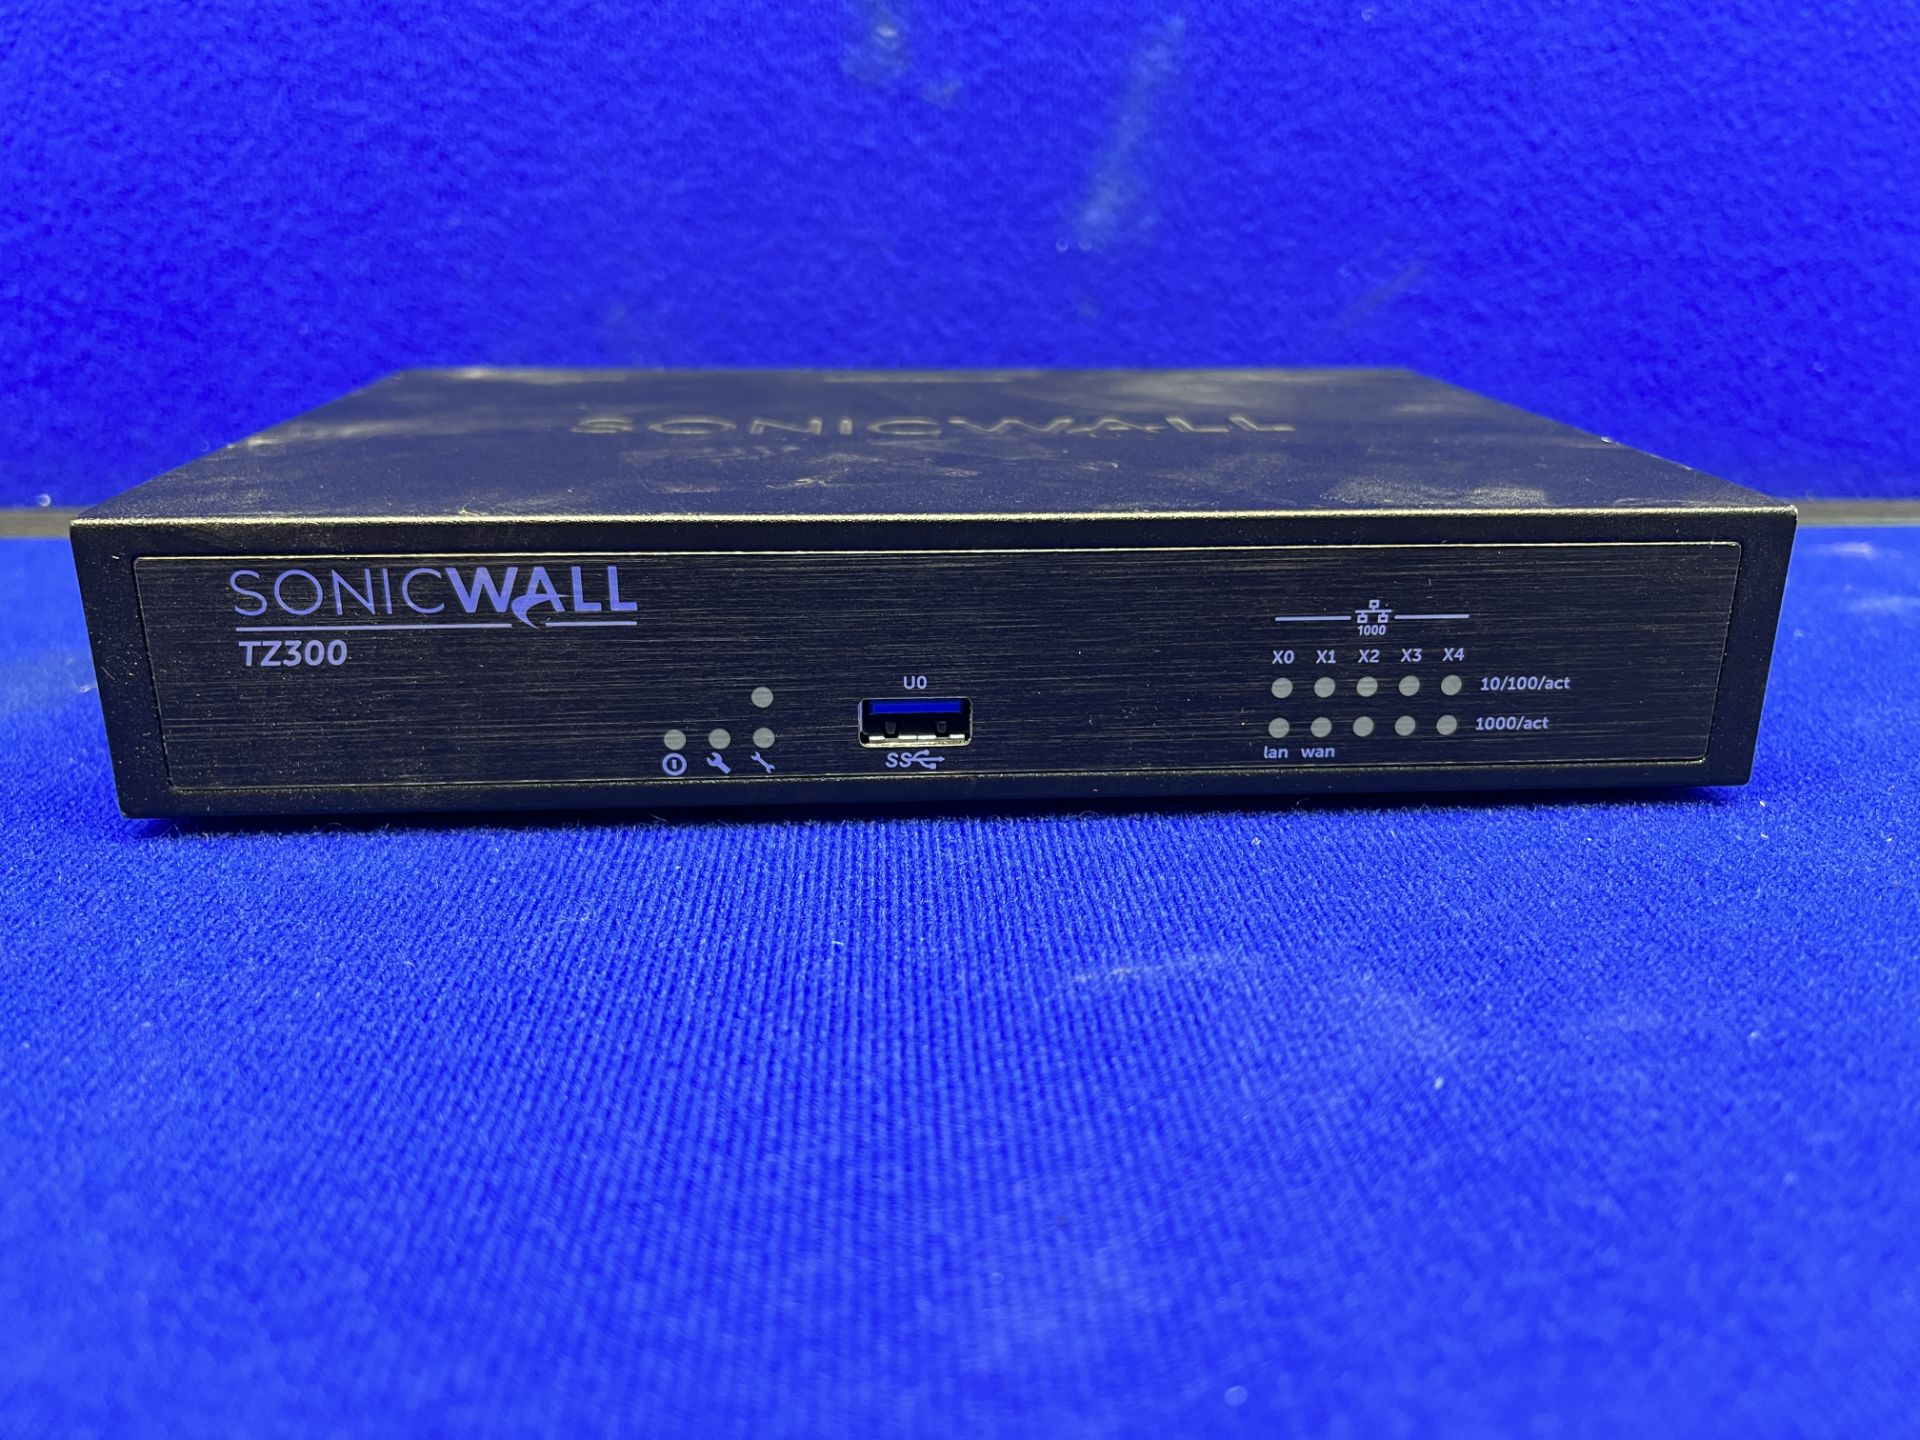 SONICWALL TZ300 Network Security Appliance - Image 2 of 3